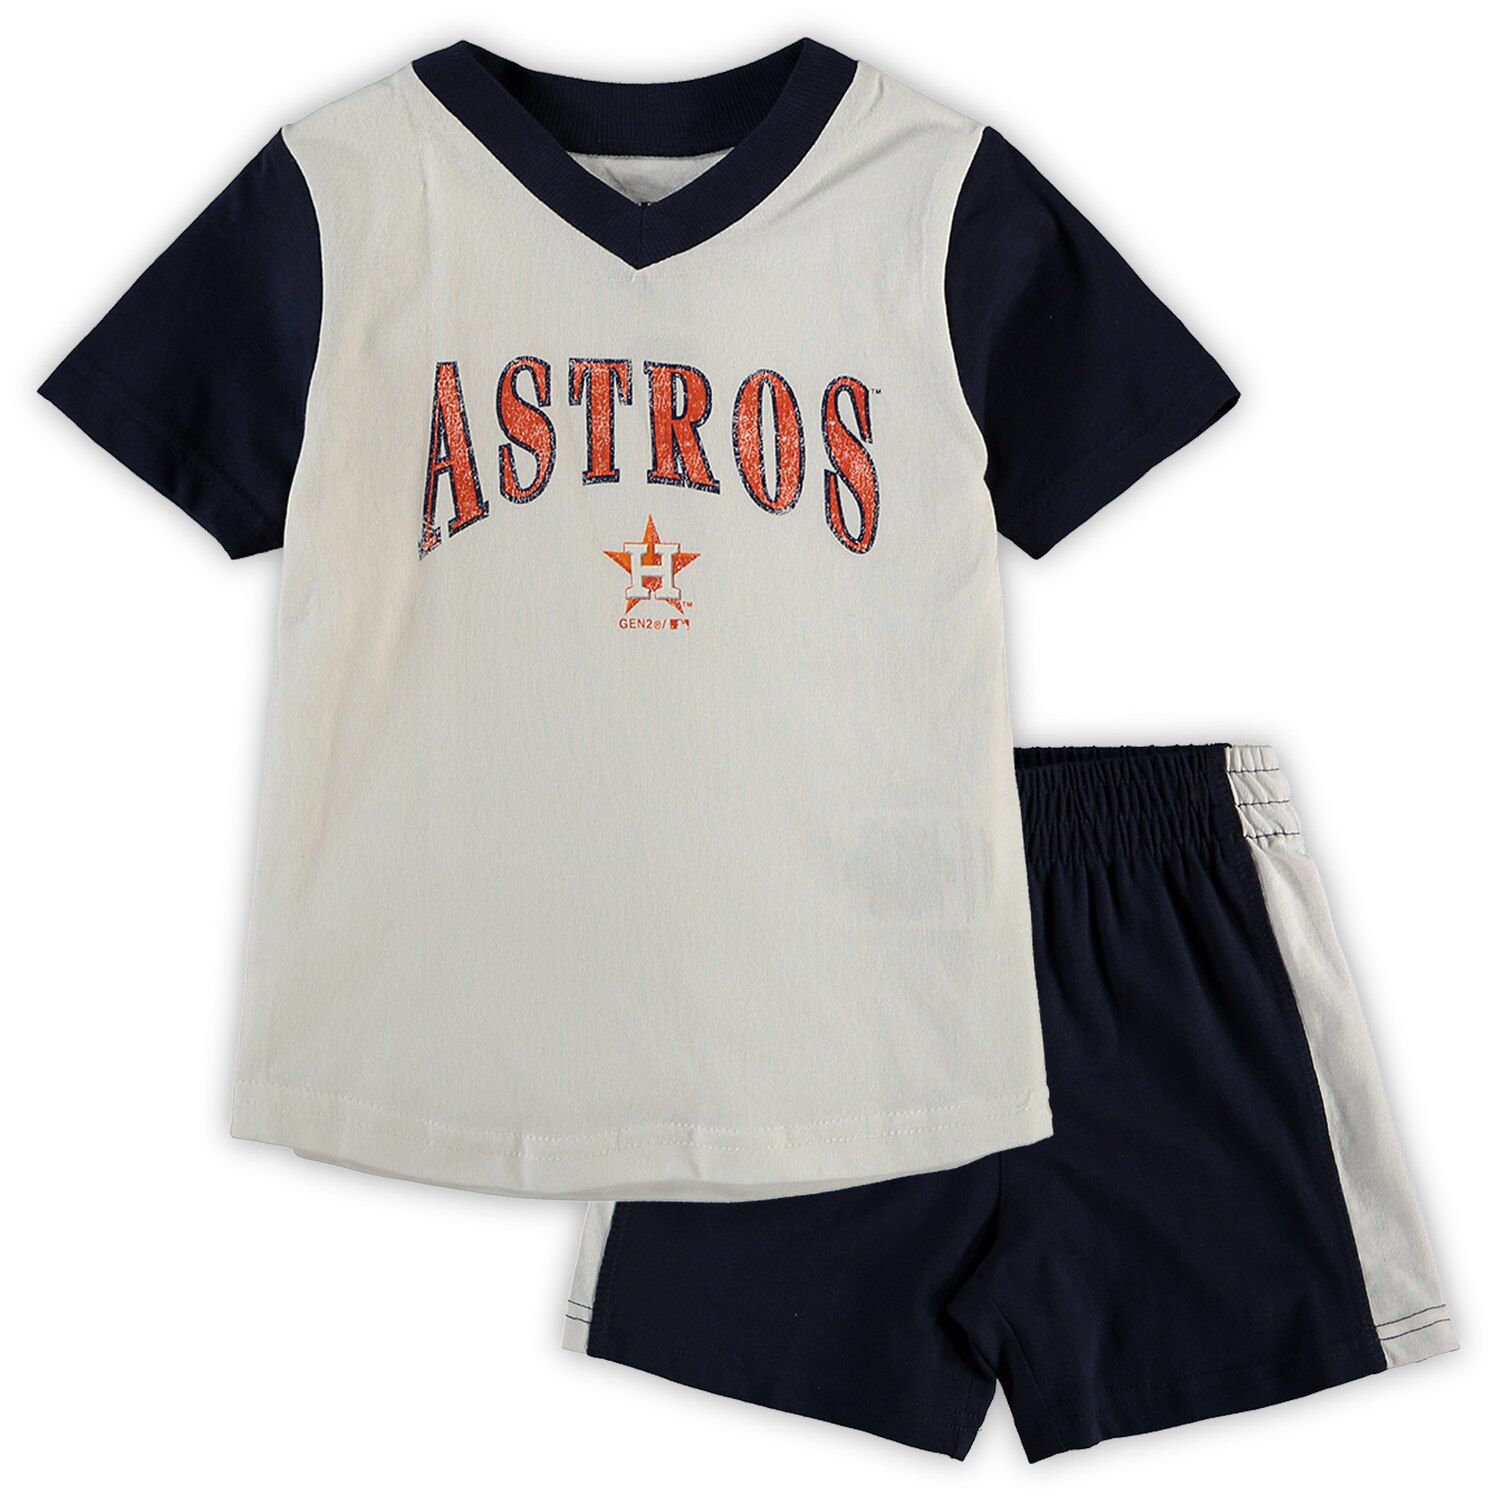 astros shirts for toddlers